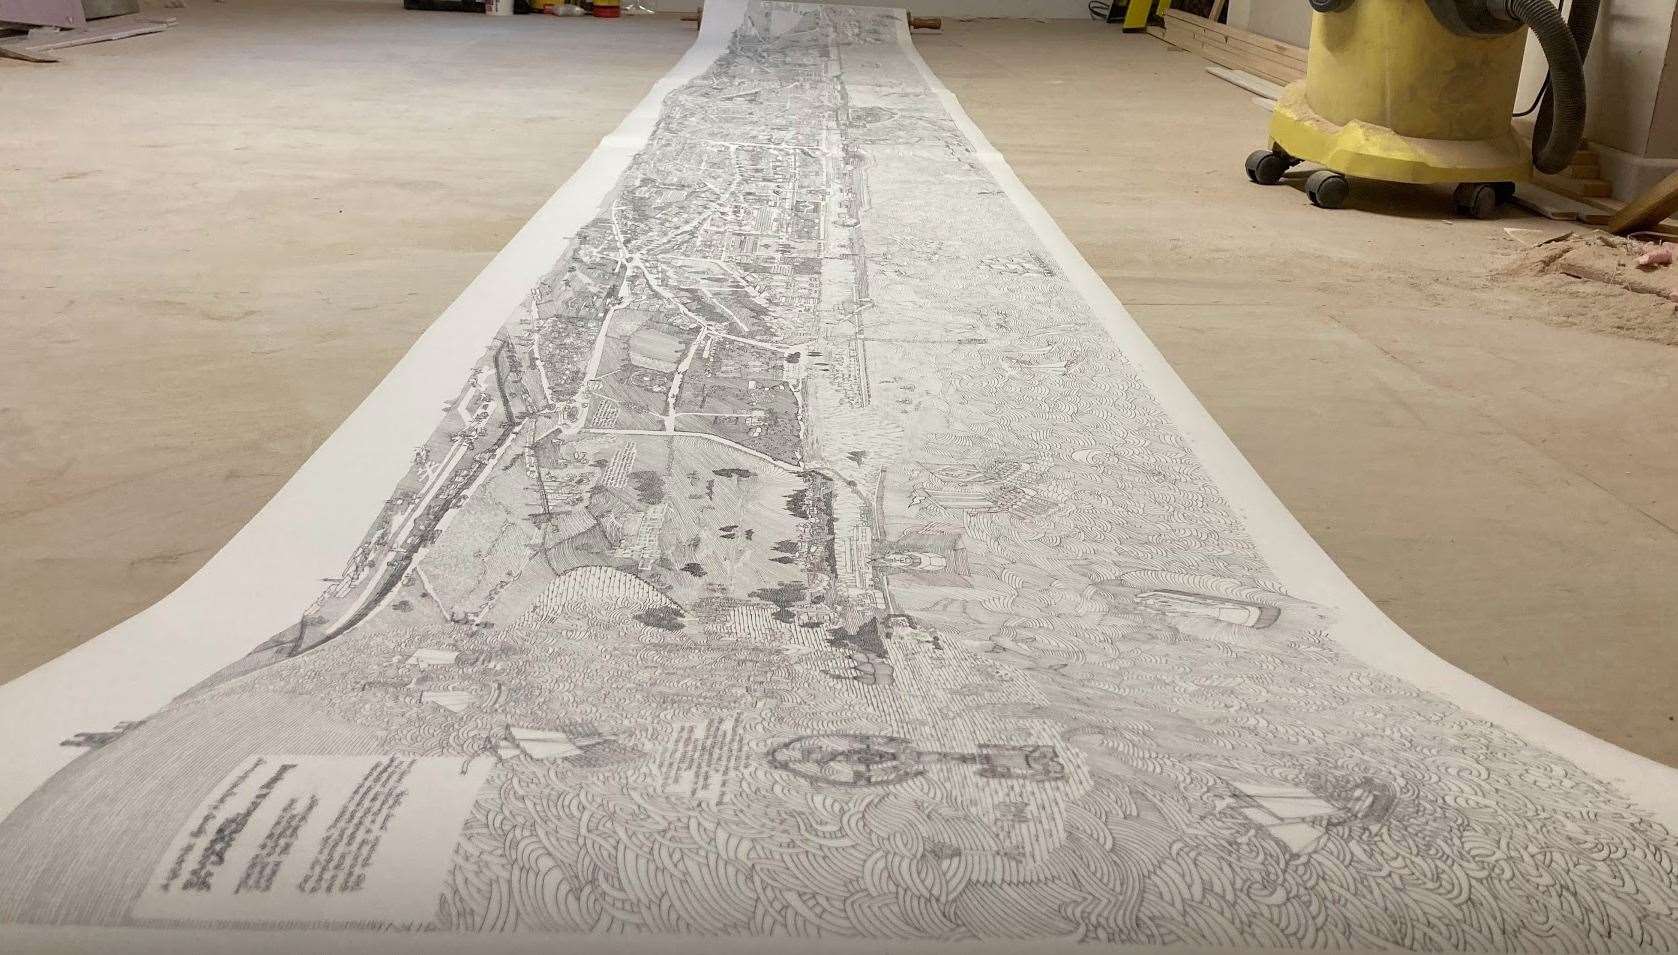 The 5.5 metre scroll took artist Dave Smith seven years to complete